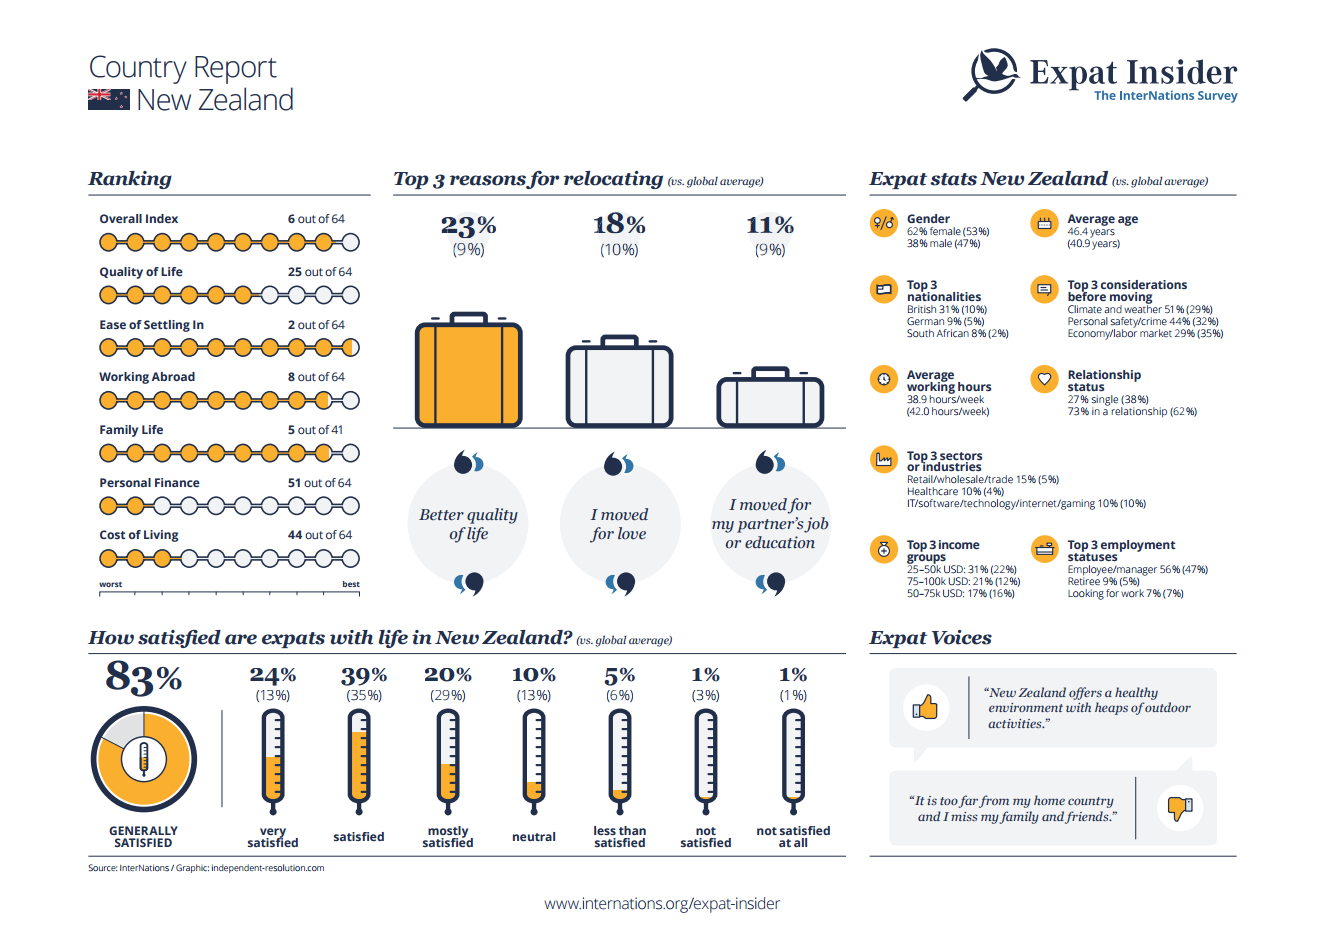 Expat statistics for New Zealand - infographic